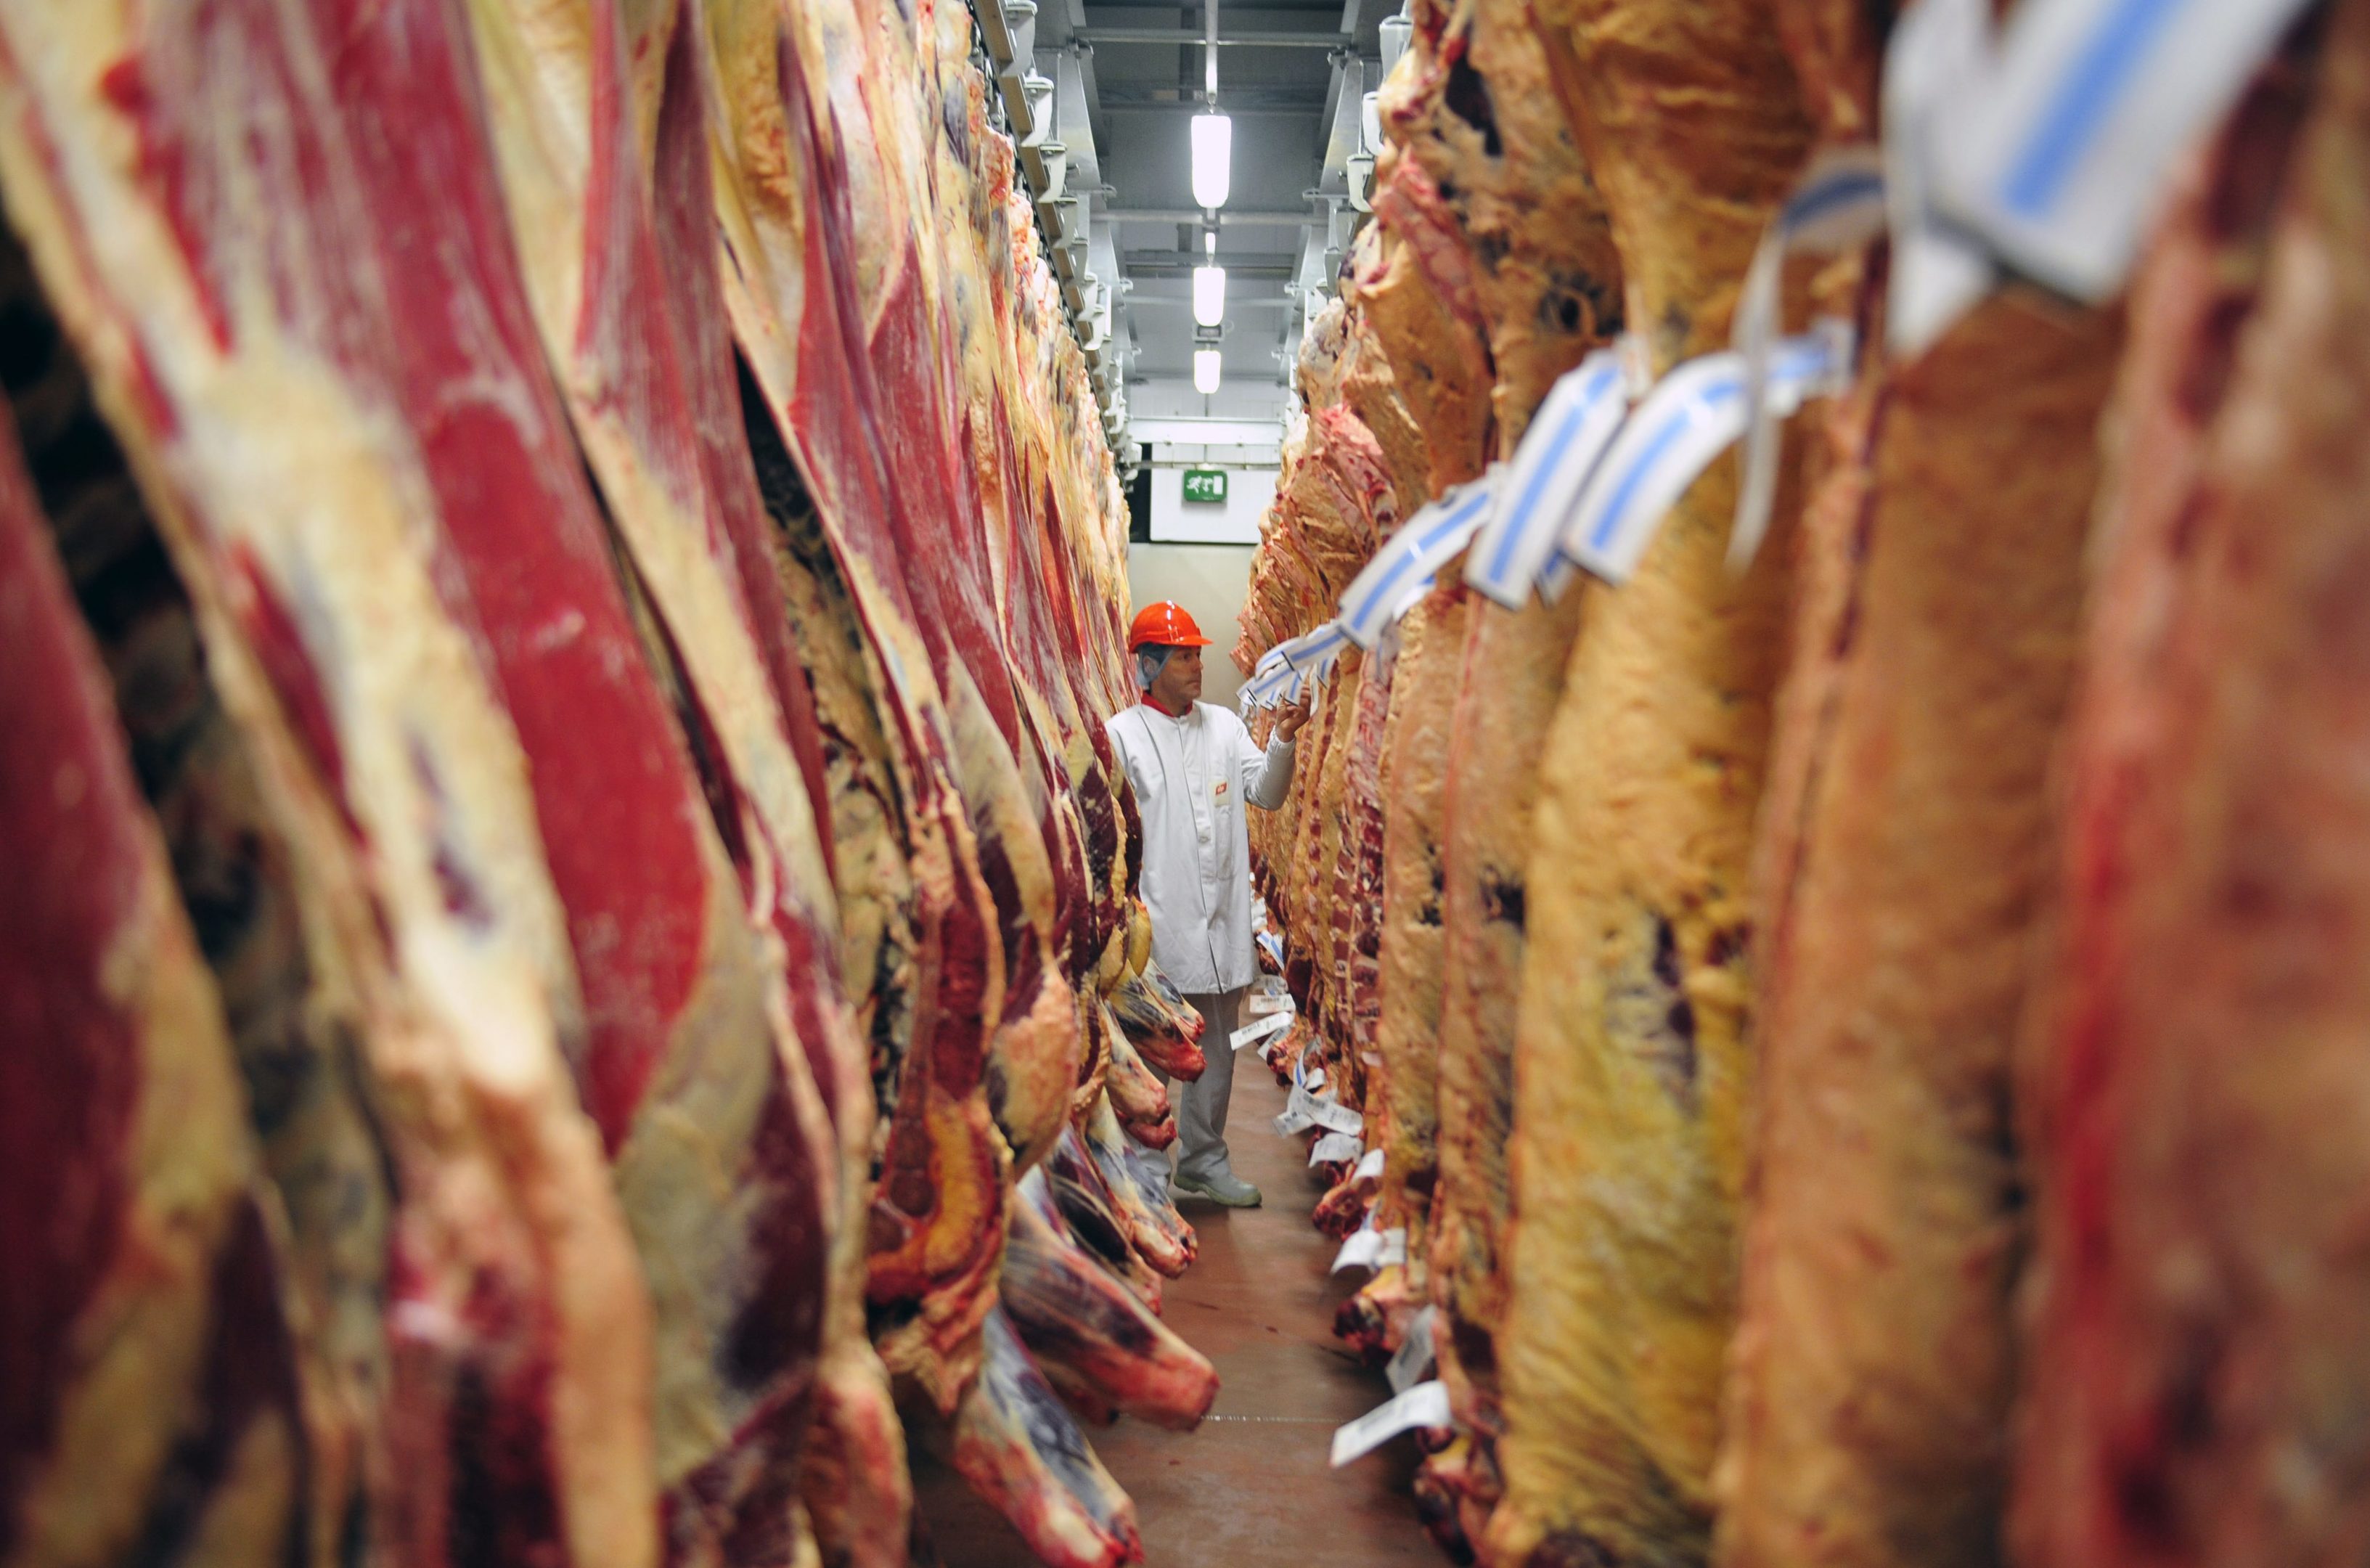 An employee of ABP Foods inspects Beef carcases in a cold storage room.